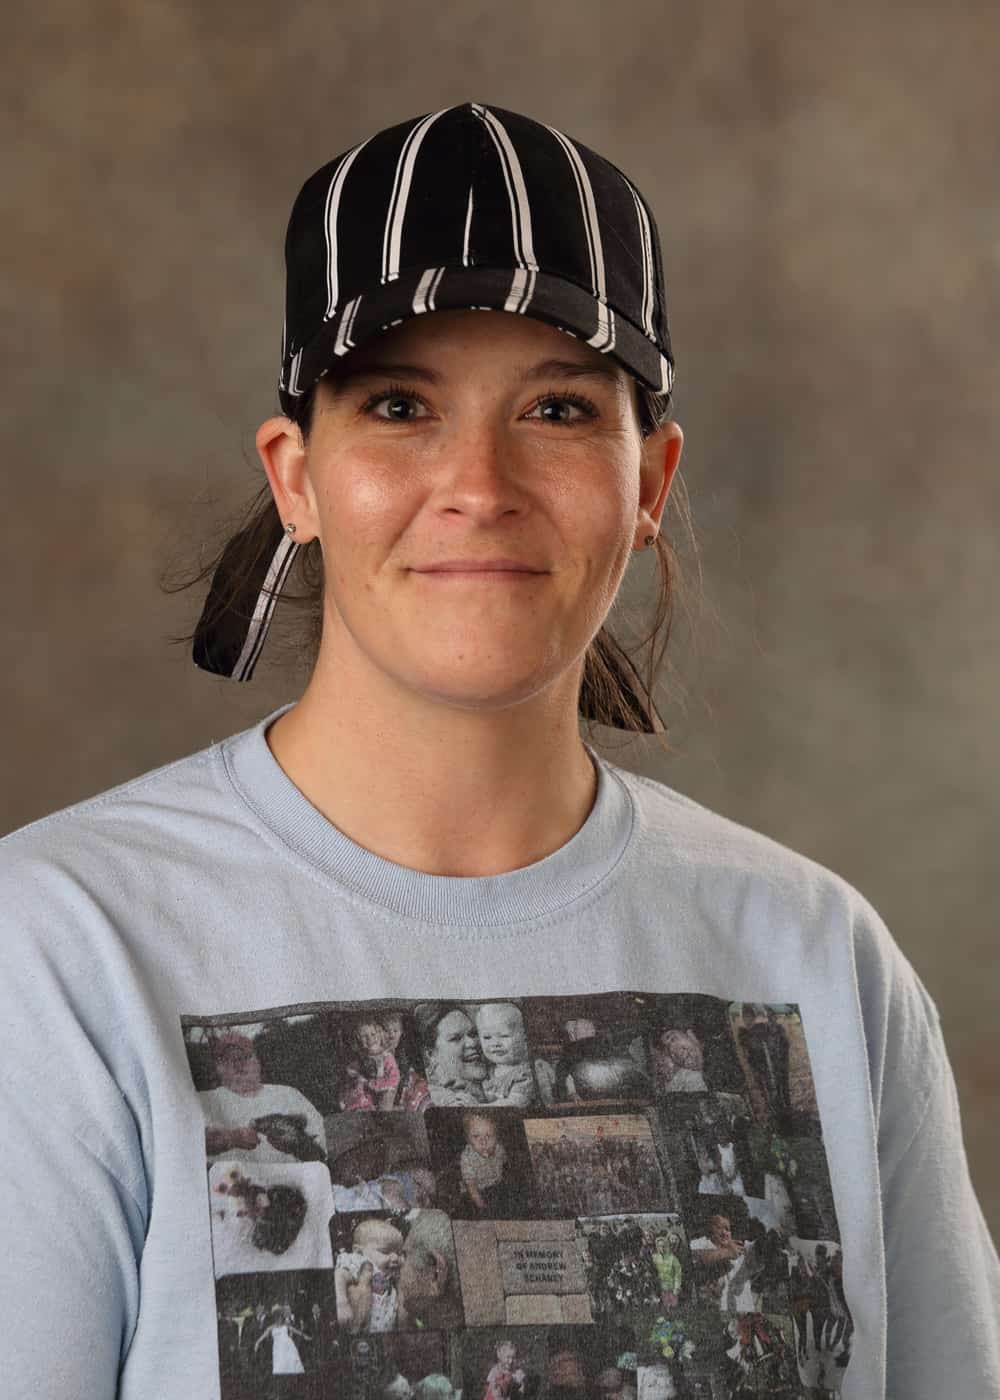 Photo of Kitchen Assistant Heat Riley. She is a Caucasian woman with brown hair and hazel eyes. She is smiling and wears a black and white striped hat and a light gray T-shirt with a collage of family photos on it.